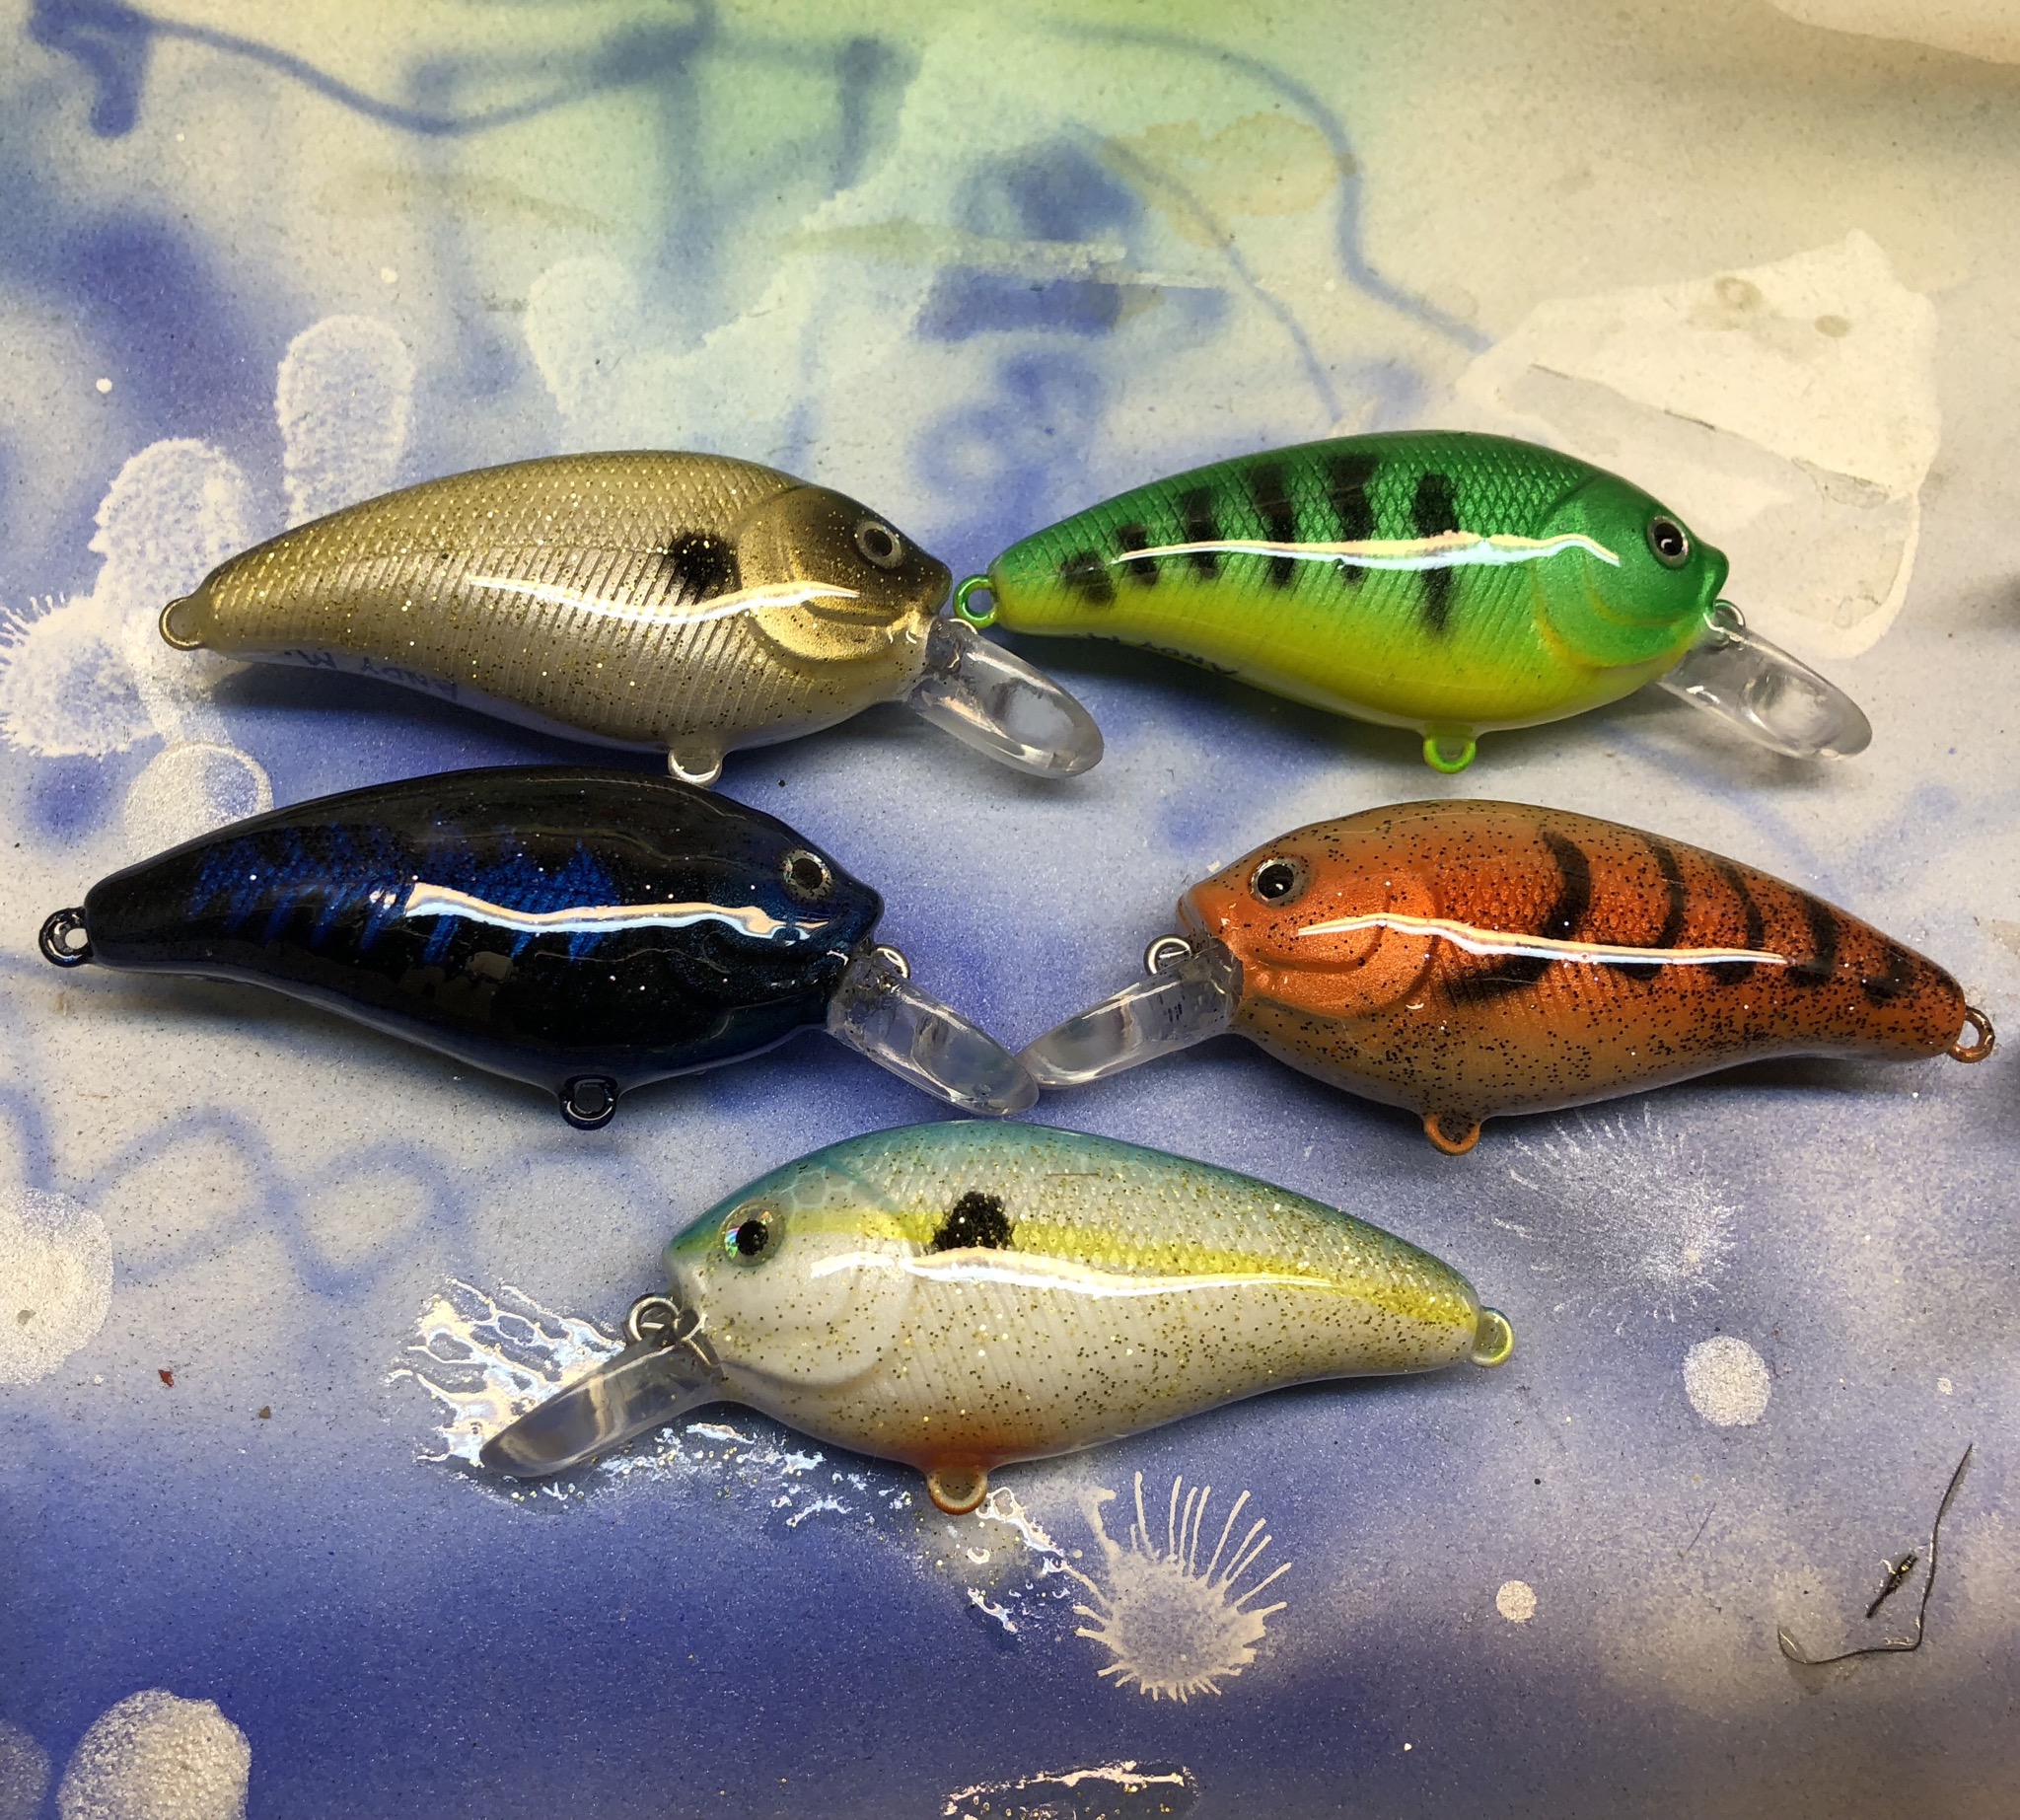 Best Brand or Type of airbrush paint for Painting hard bait